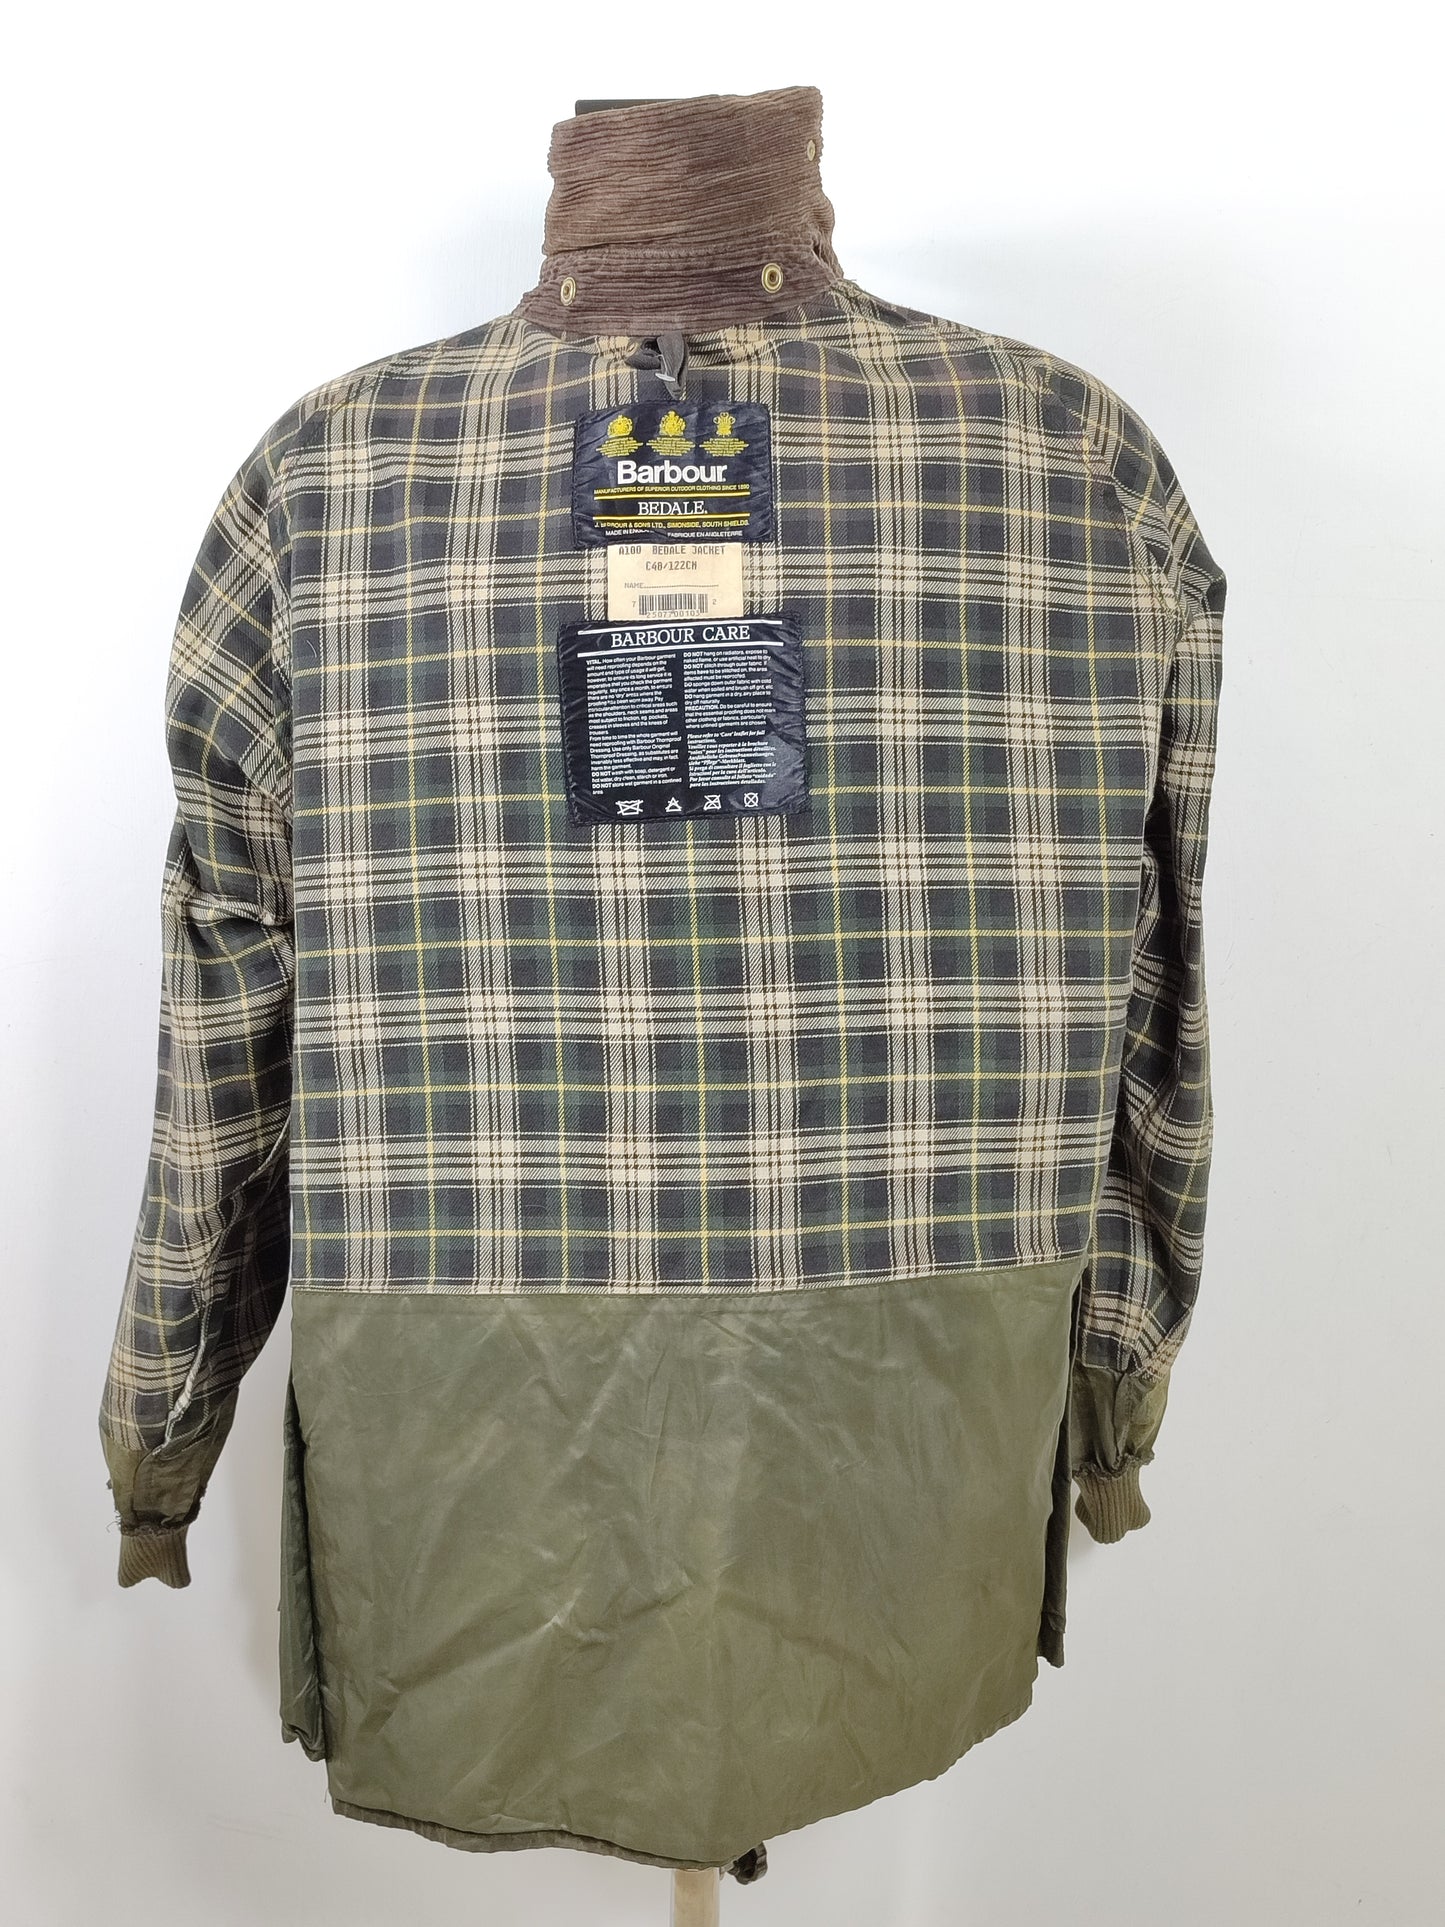 Giacca Barbour Bedale Uomo Vintage verde C48/122cm Man Bedale waxed Green jacket Size XL